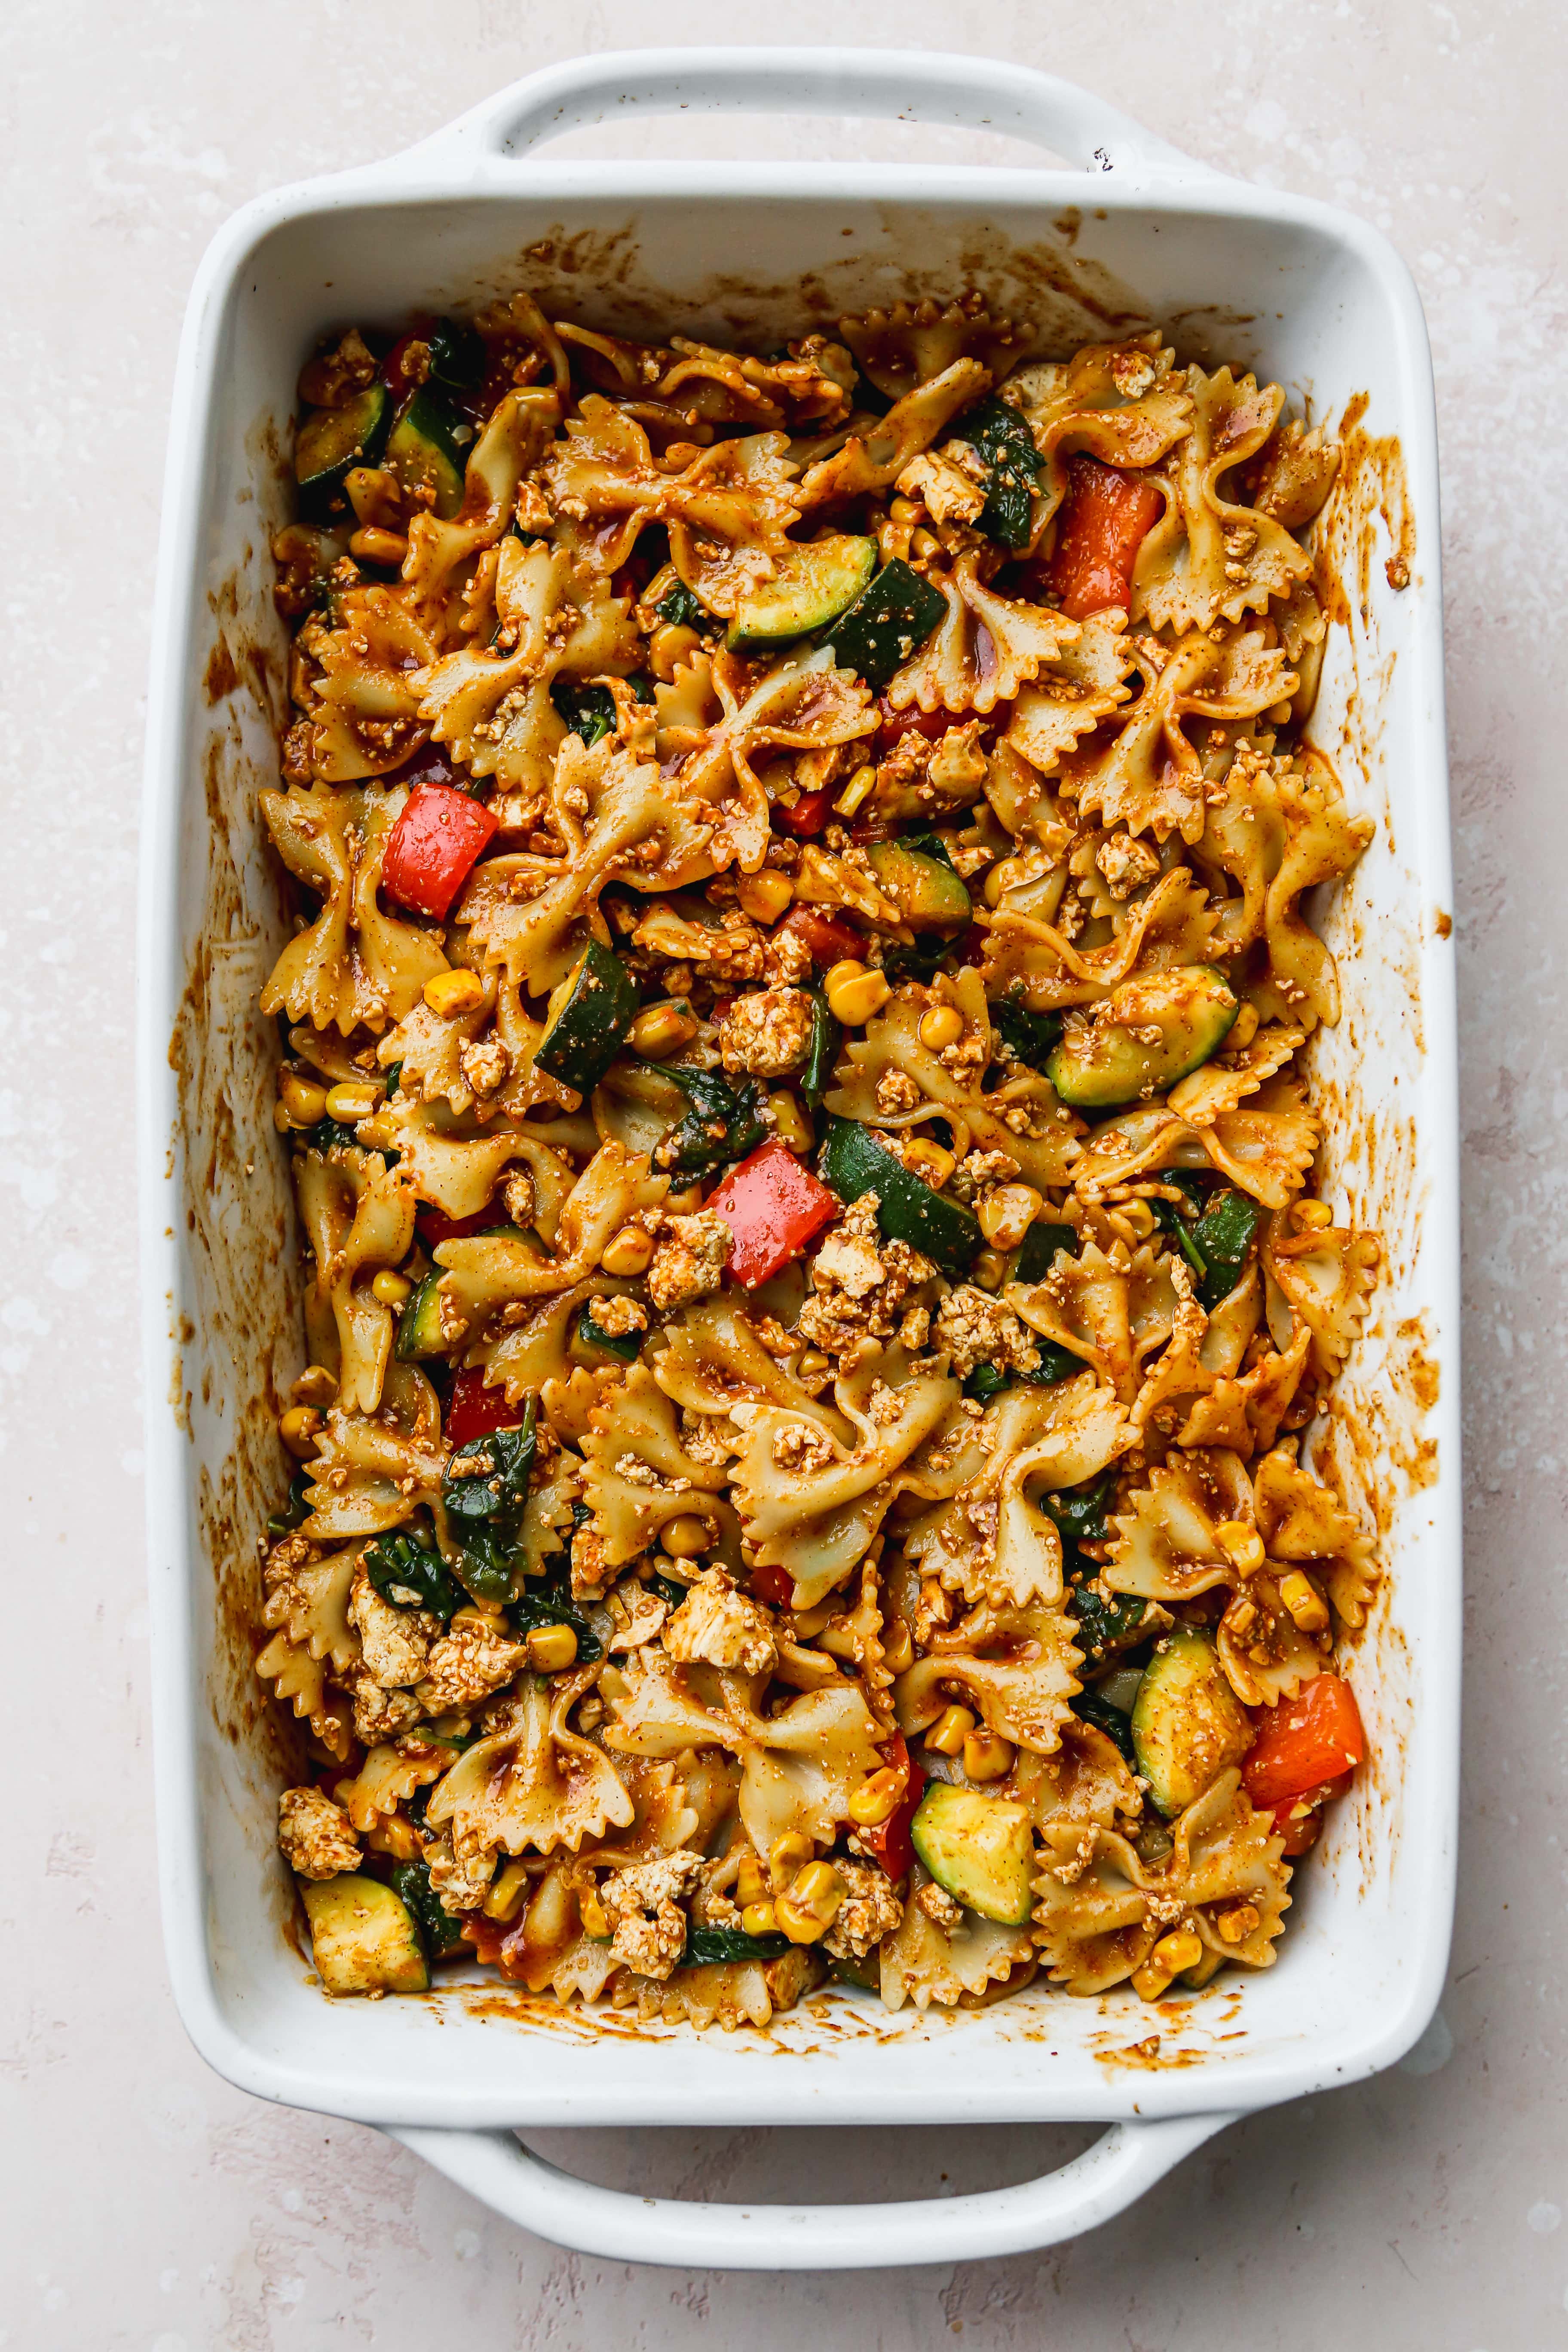 Bowtie pasta tossed in cooked vegetables and taco sauce in a large baking dish.